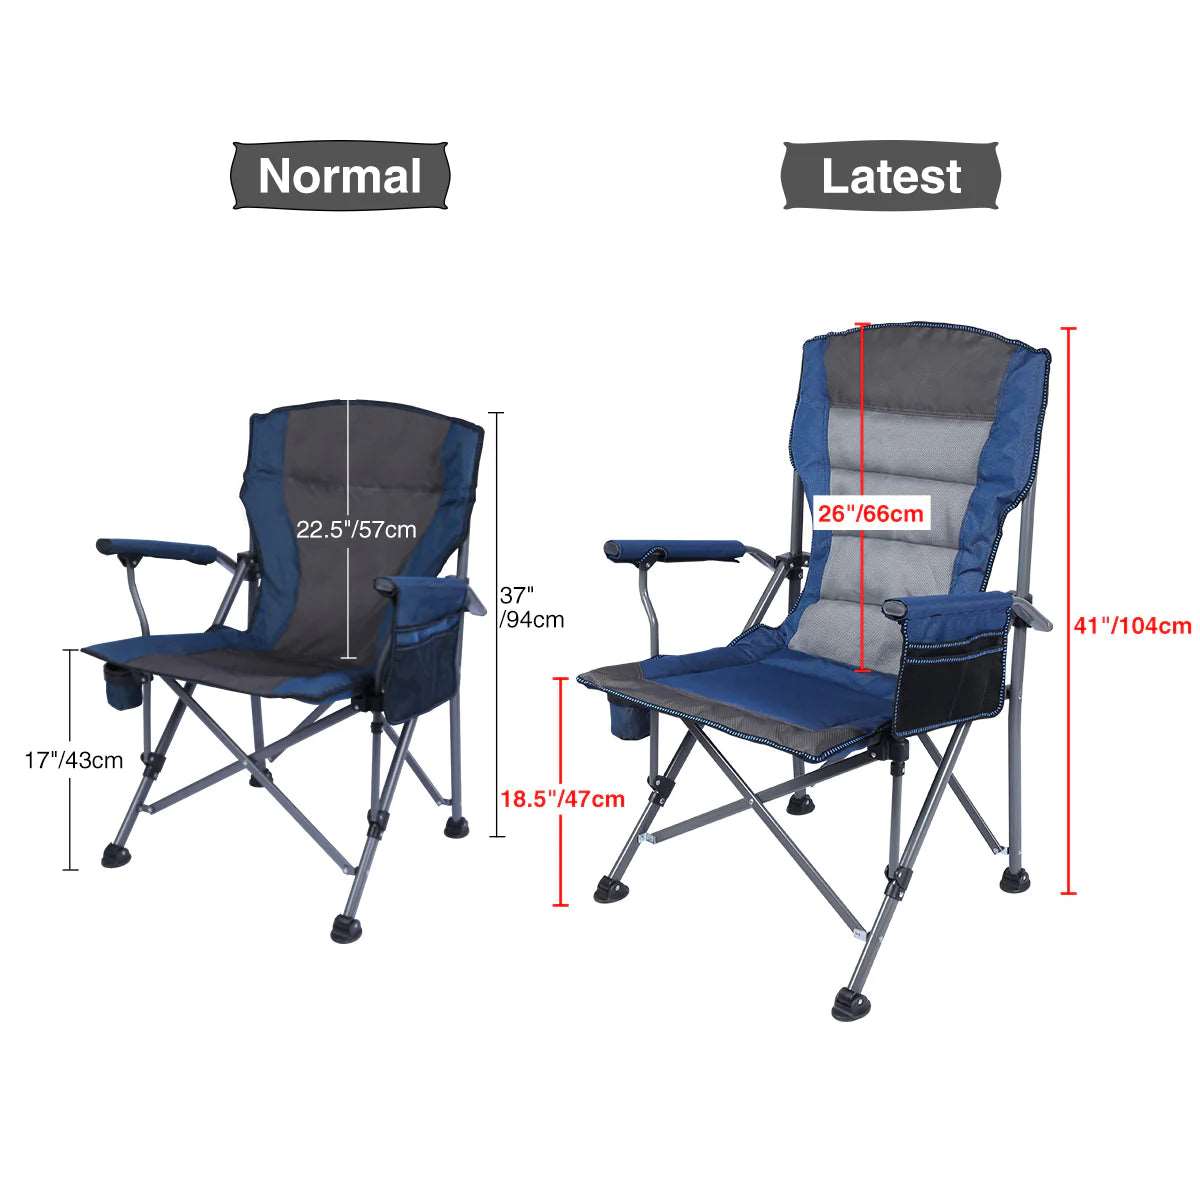 Heavy Duty Folding Camping Chair with High Back & Cup Holder